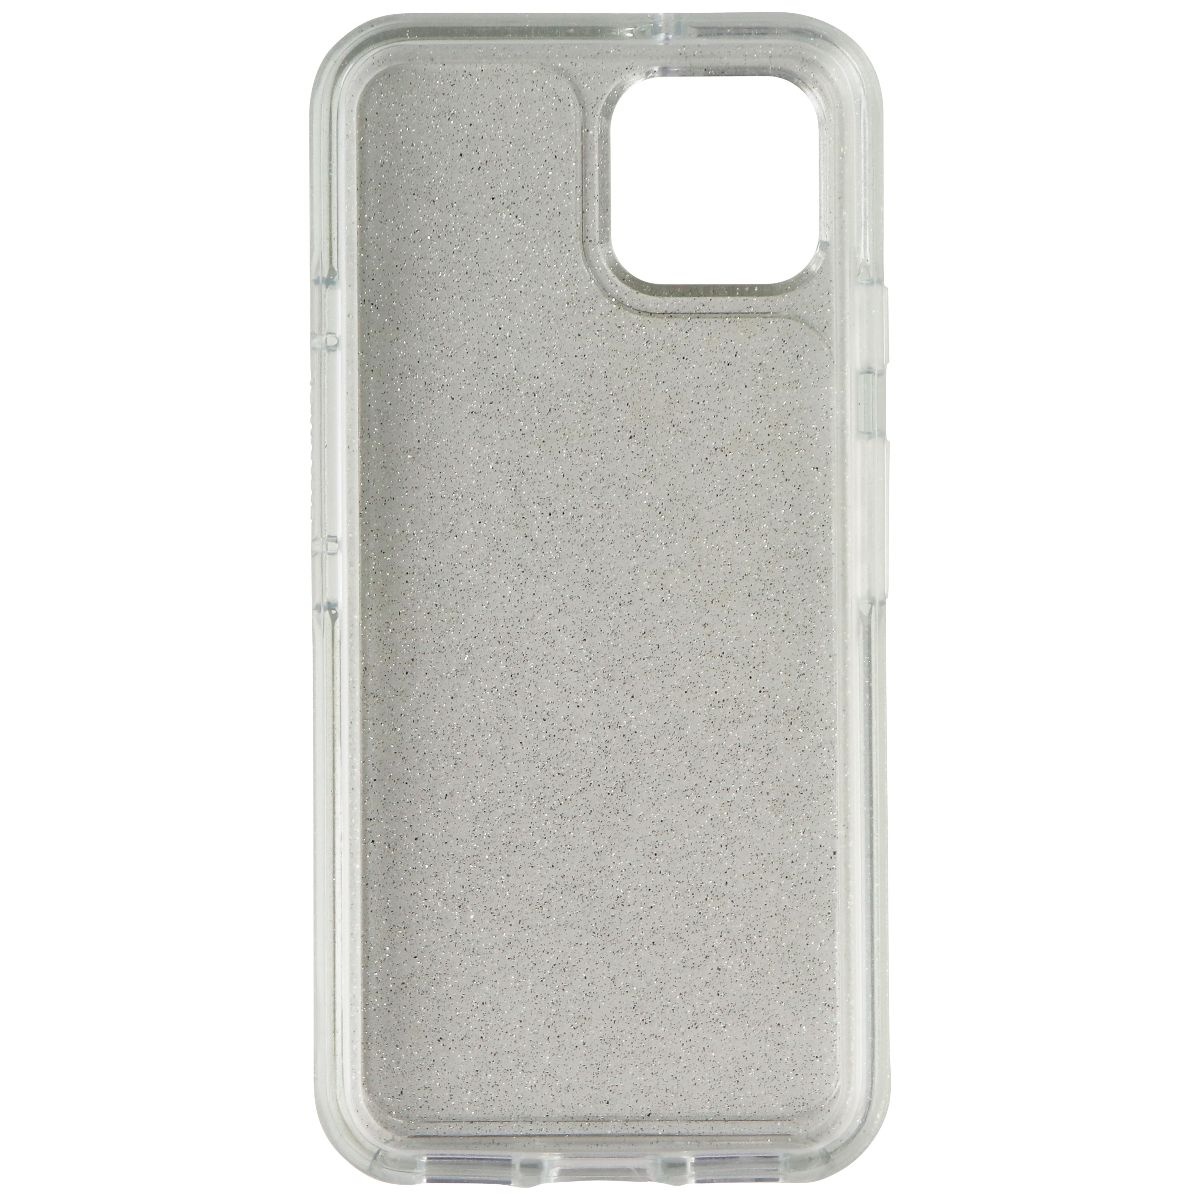 OtterBox Symmetry Series Case for Google Pixel 4 Smartphone - Stardust/Clear (Used) - image 3 of 3